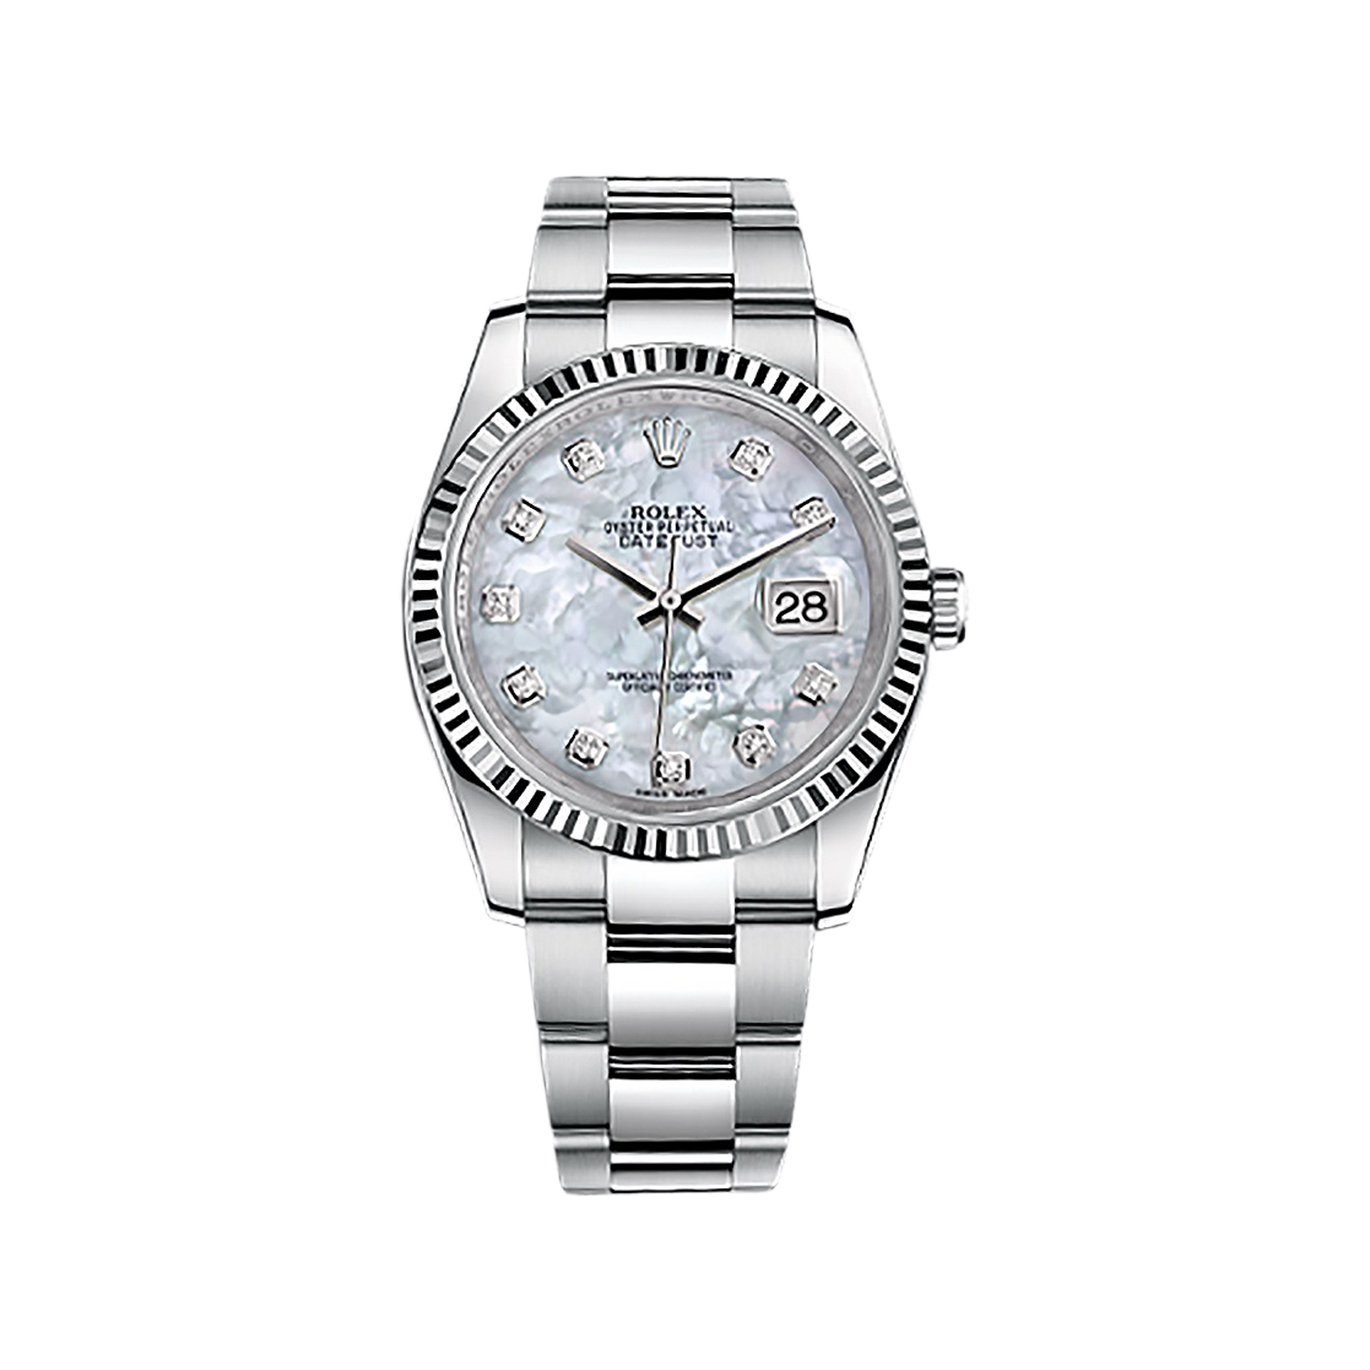 Datejust 36 116234 White Gold & Stainless Steel Watch (White Mother-of-Pearl Set with Diamonds)